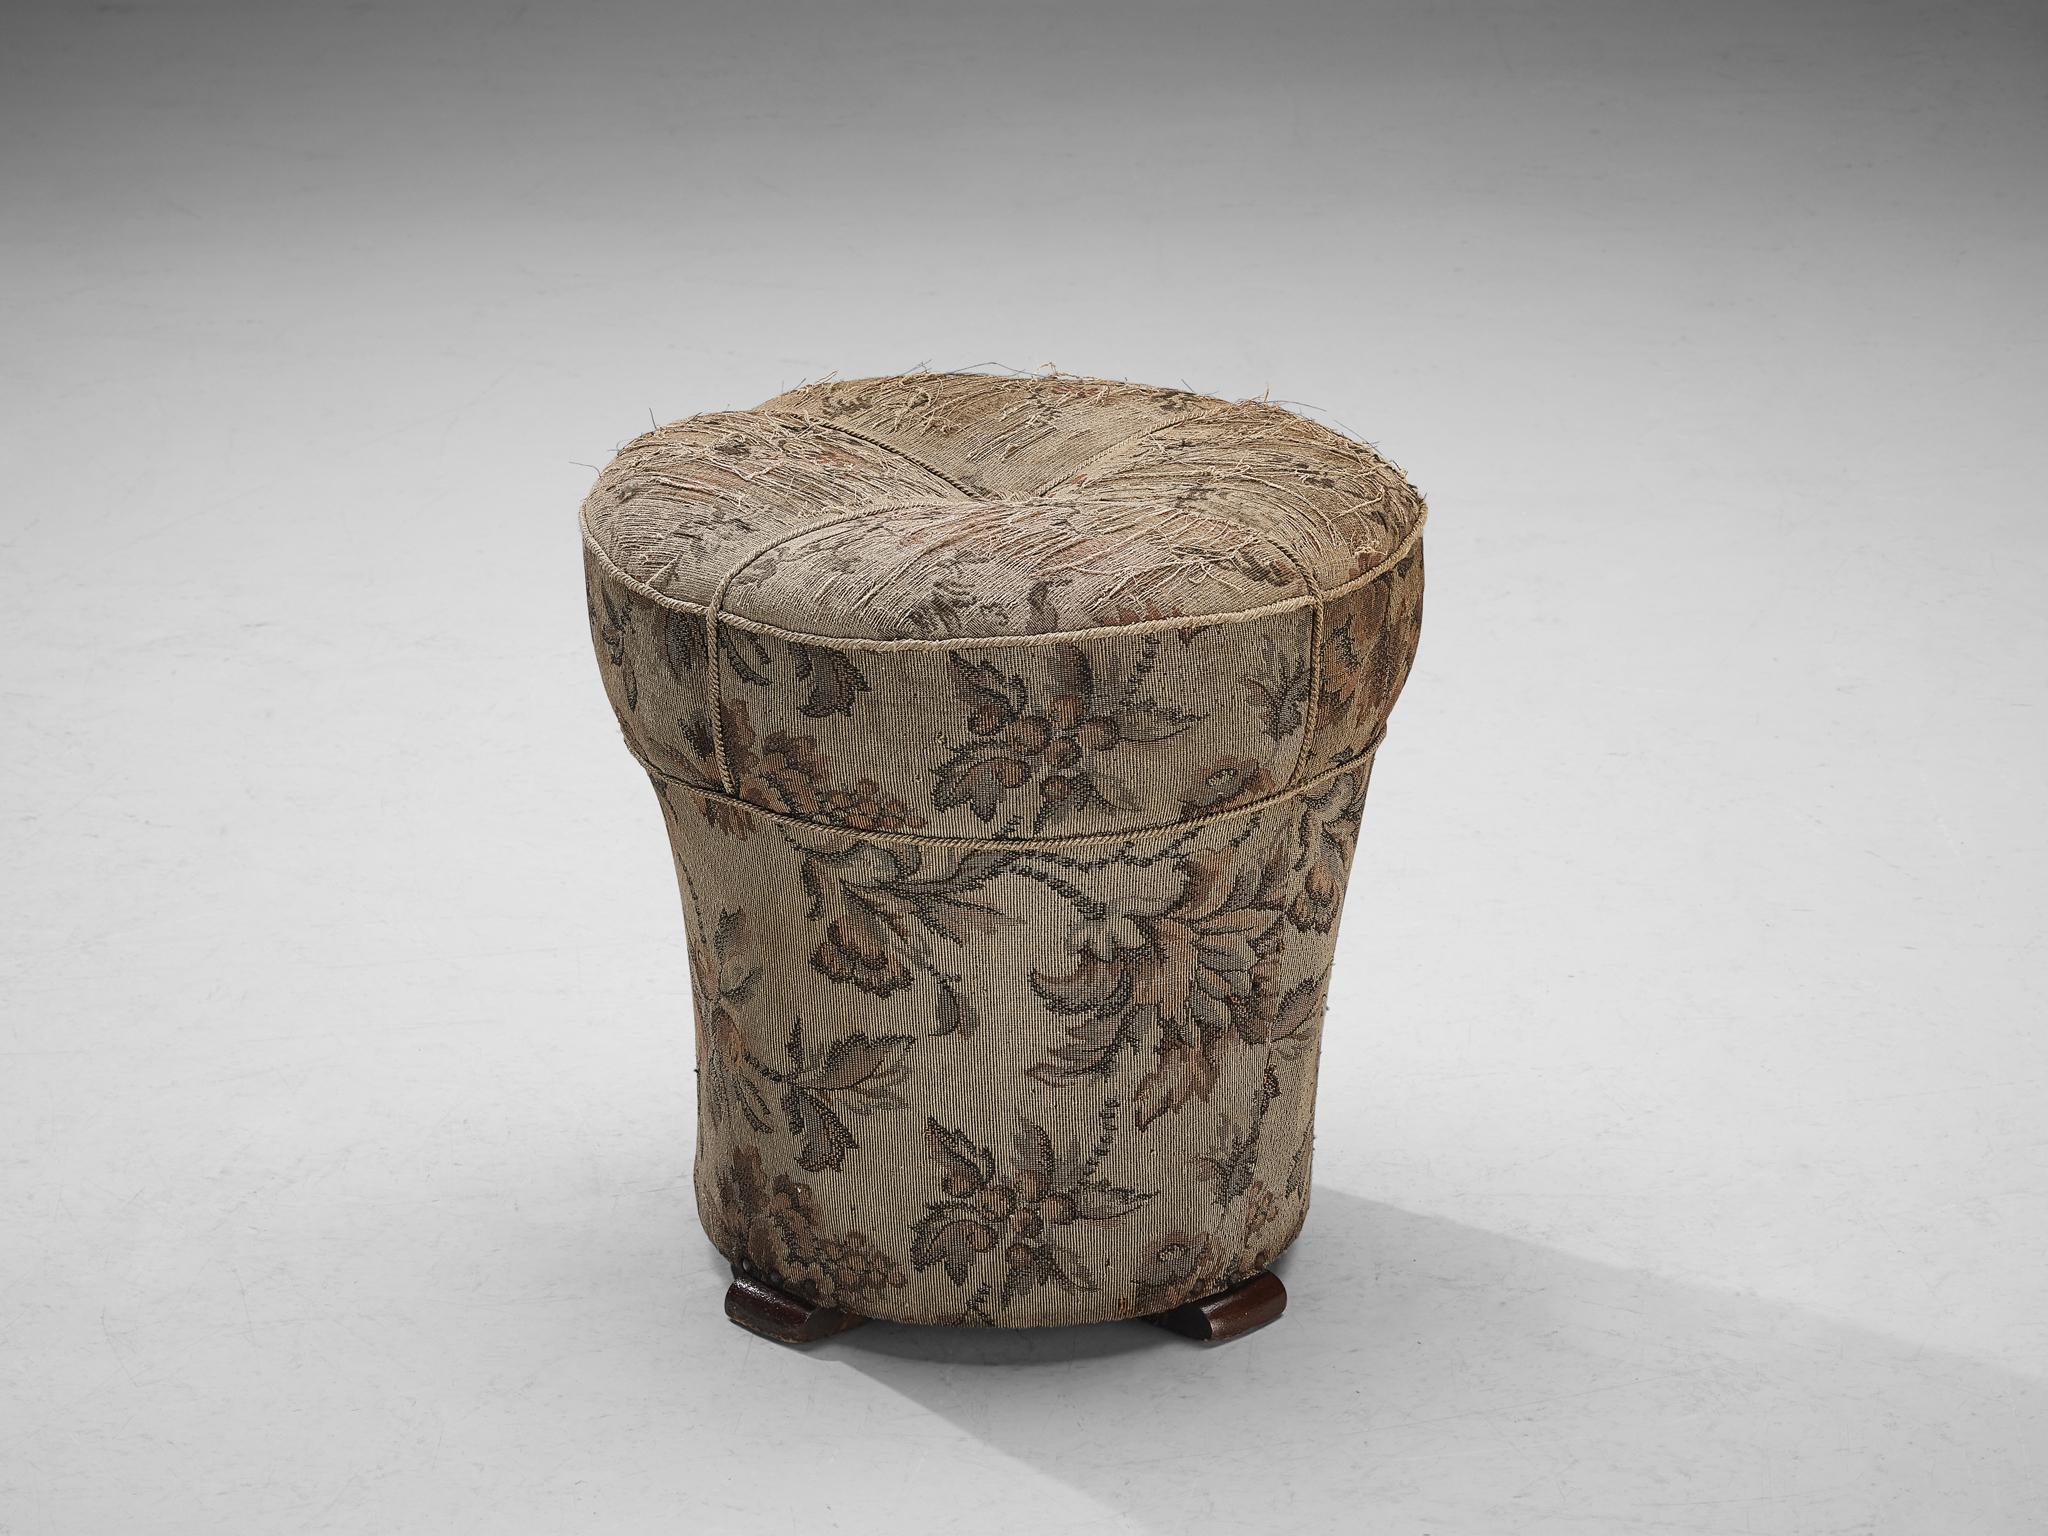 Jindrich Halabala for UP Závody, footstool / ottoman / tabouret, fabric, wood, Czech Republic, design 1930s 

This poetic pouf is designed in the 1930s when the Art Deco Period was at its highest point and distinguishes itself by means of artistic